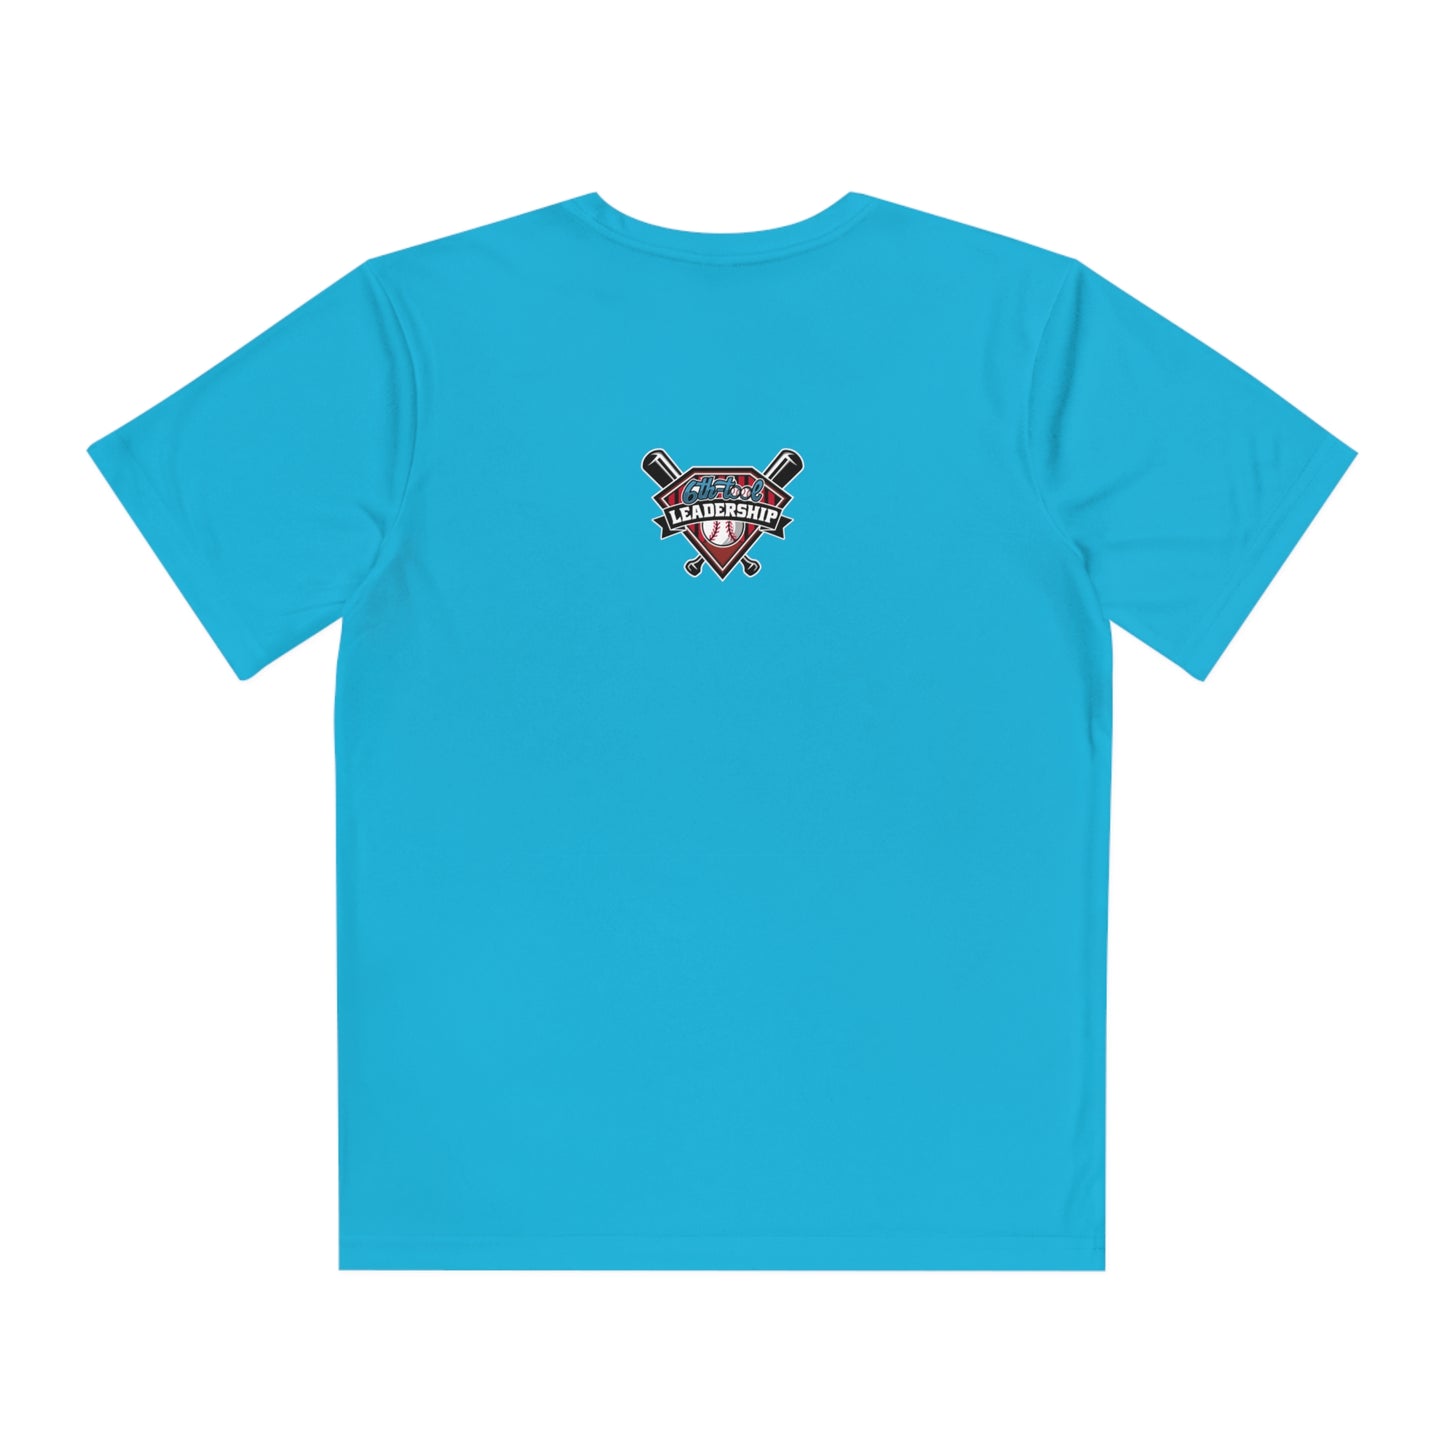 Ducks On The Pond Youth Competitor Tee